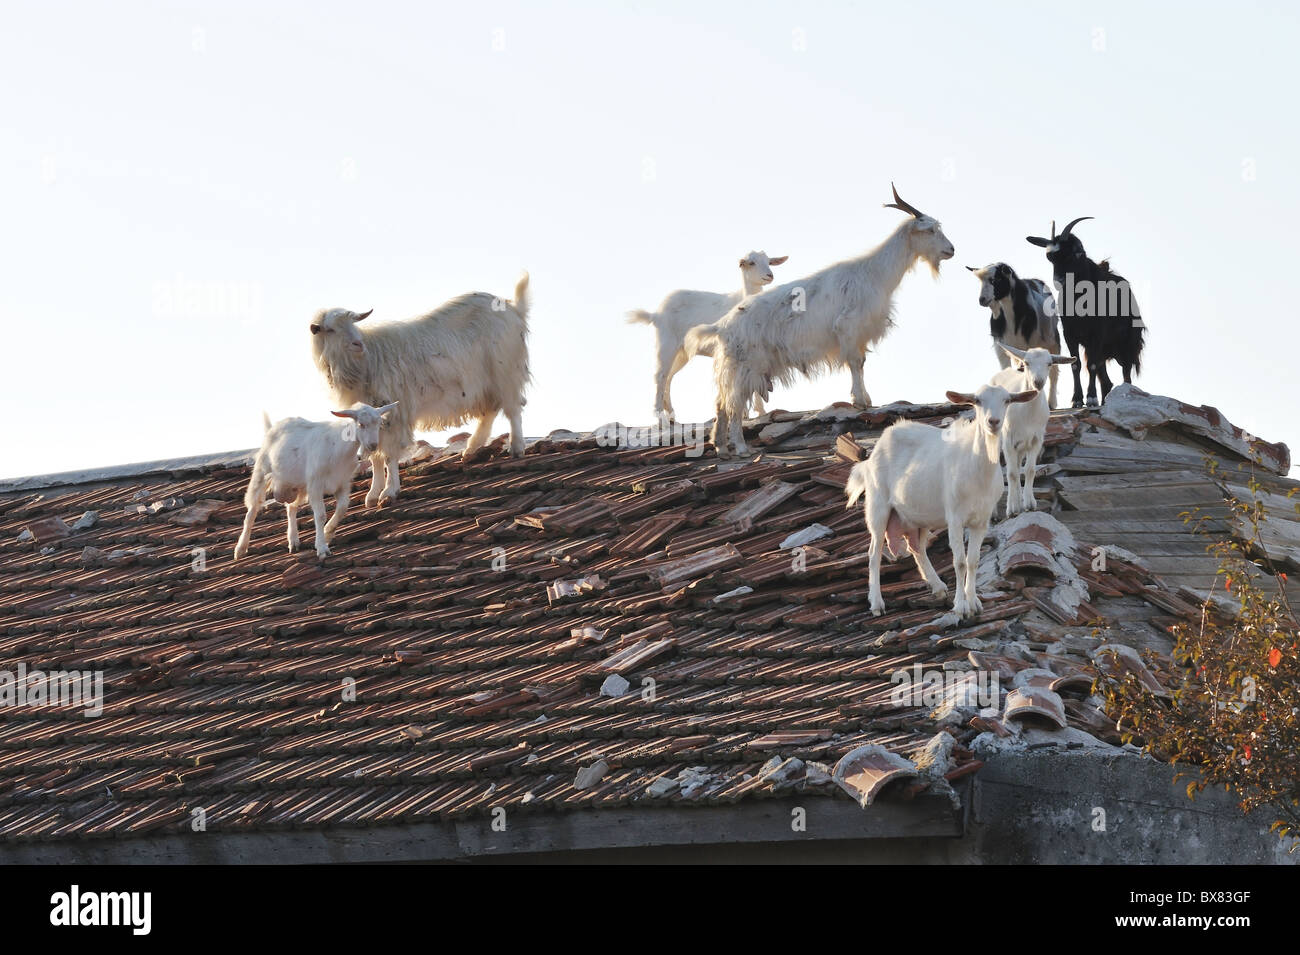 goats on the roof Stock Photo: 33369855 - Alamy